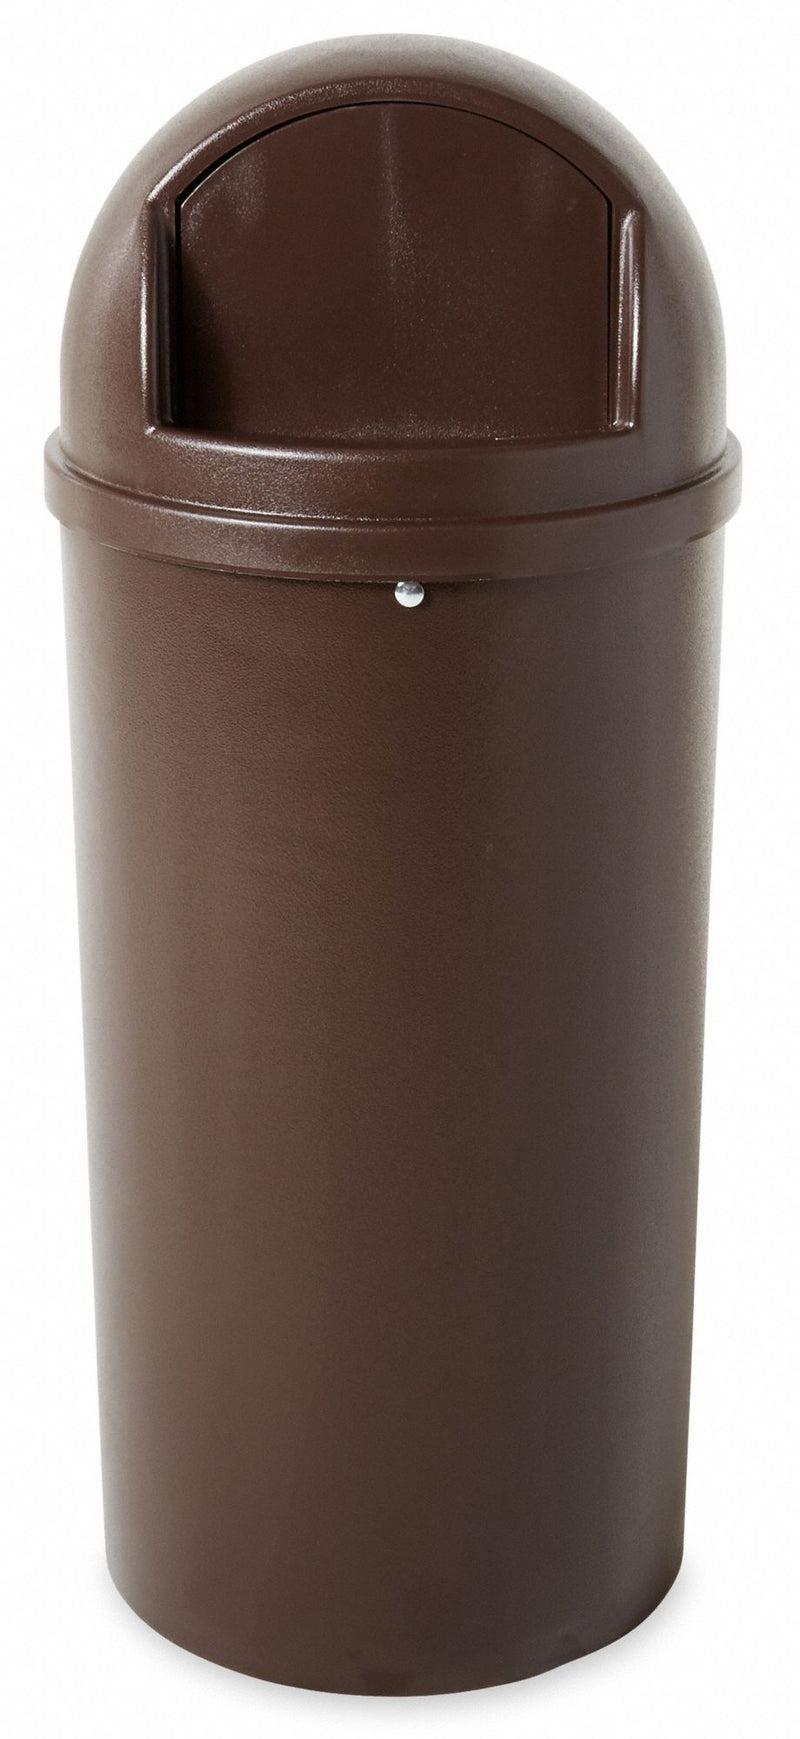 Rubbermaid Marshal Classic Container Round Polyethylene 15 Gal Brown